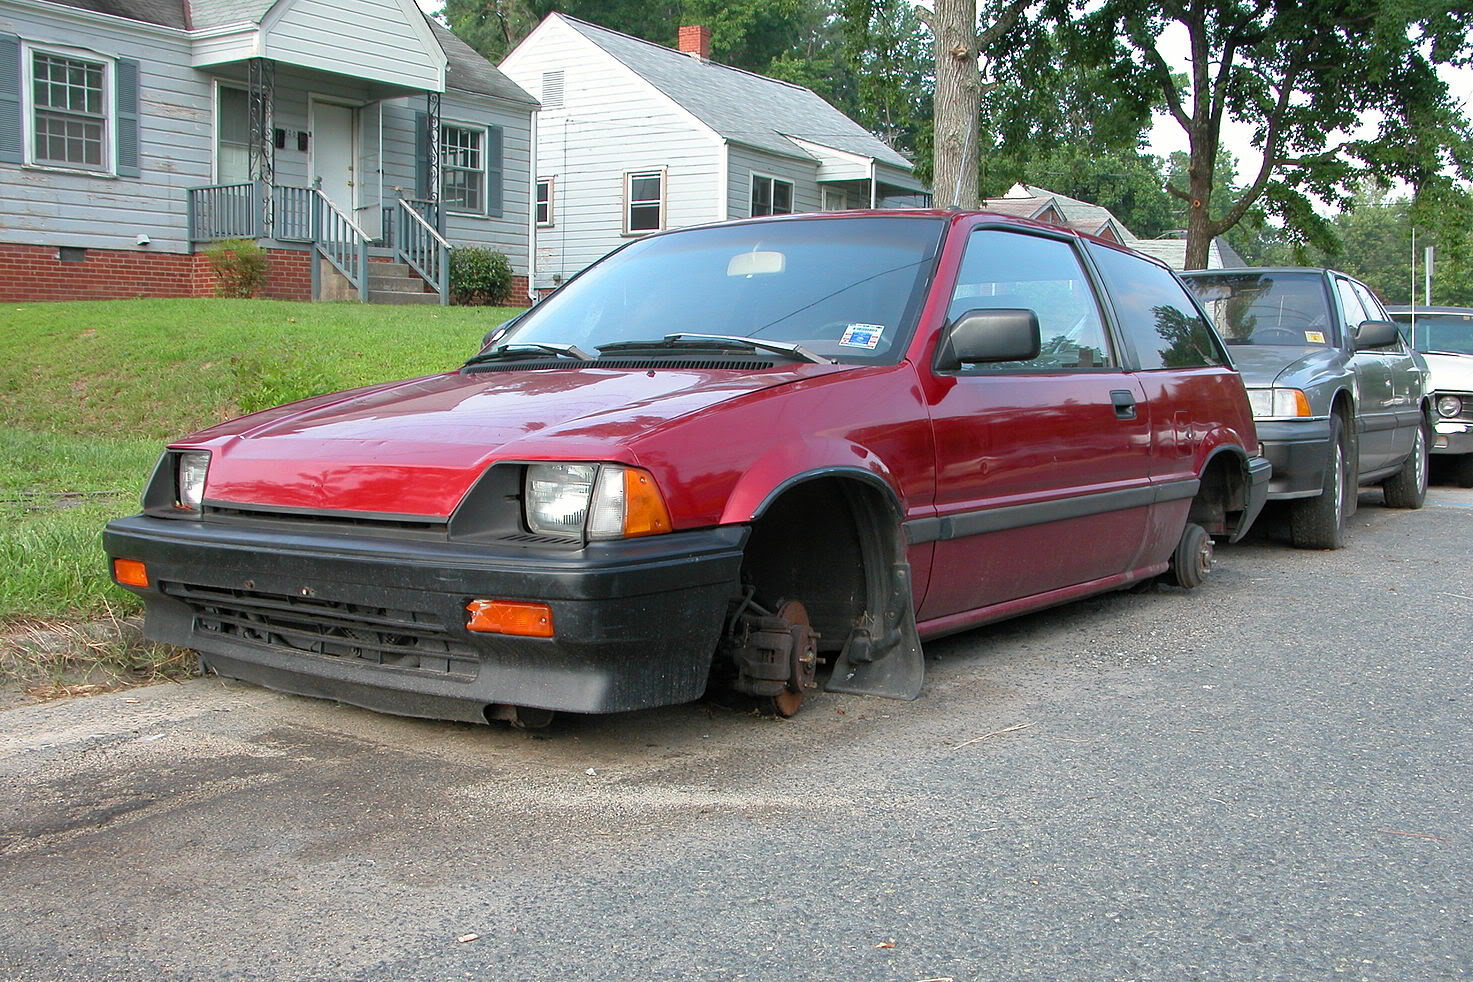 Name:  1473px-2003-07_Car_with_no_wheels_on_Edgewood_Dr_in_Durham.jpg
Views: 373
Size:  405.6 KB